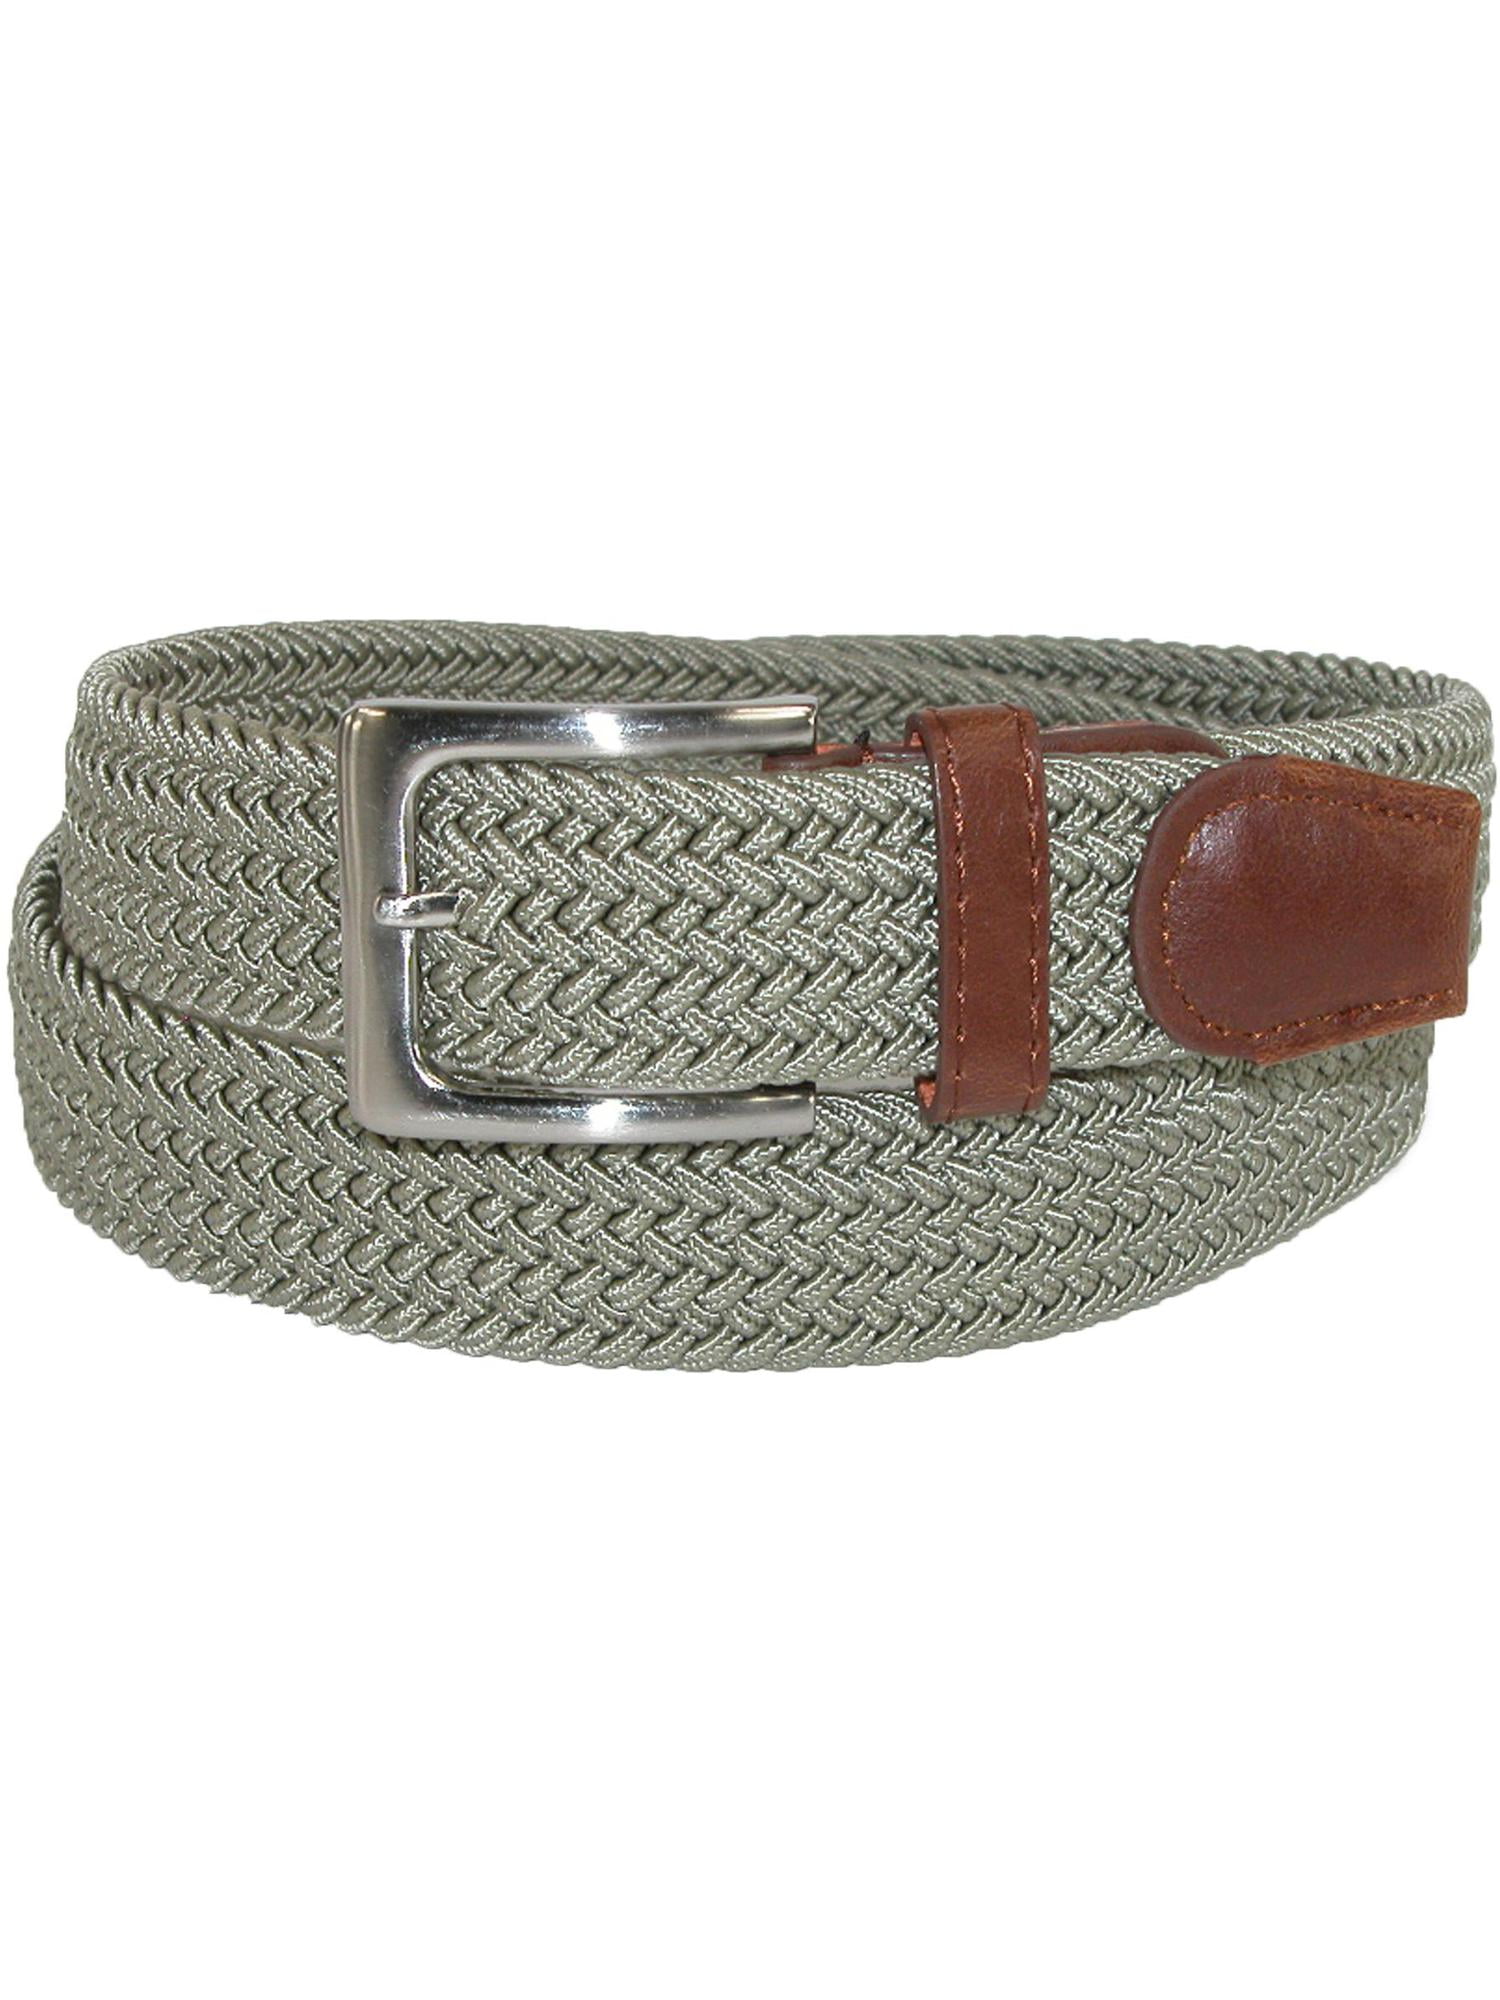 Men's Belt Elastic Stretch Waistband Woven Design Leather Tip Silver Buckle NEW